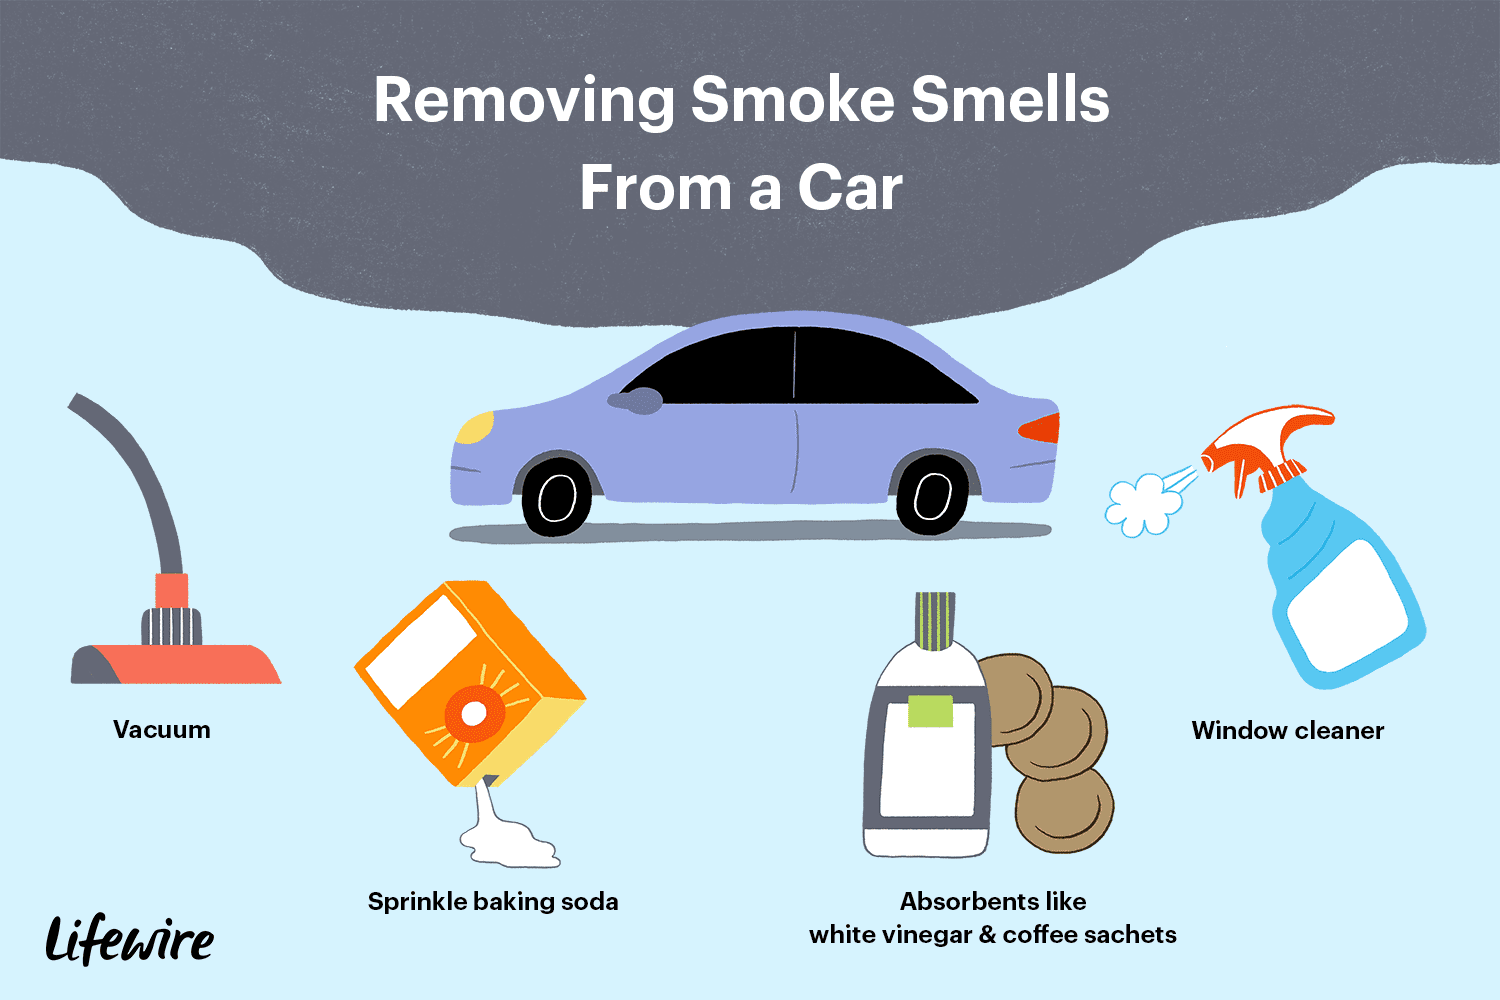 How to Remove Smoke and Cigarette Smells From a Car